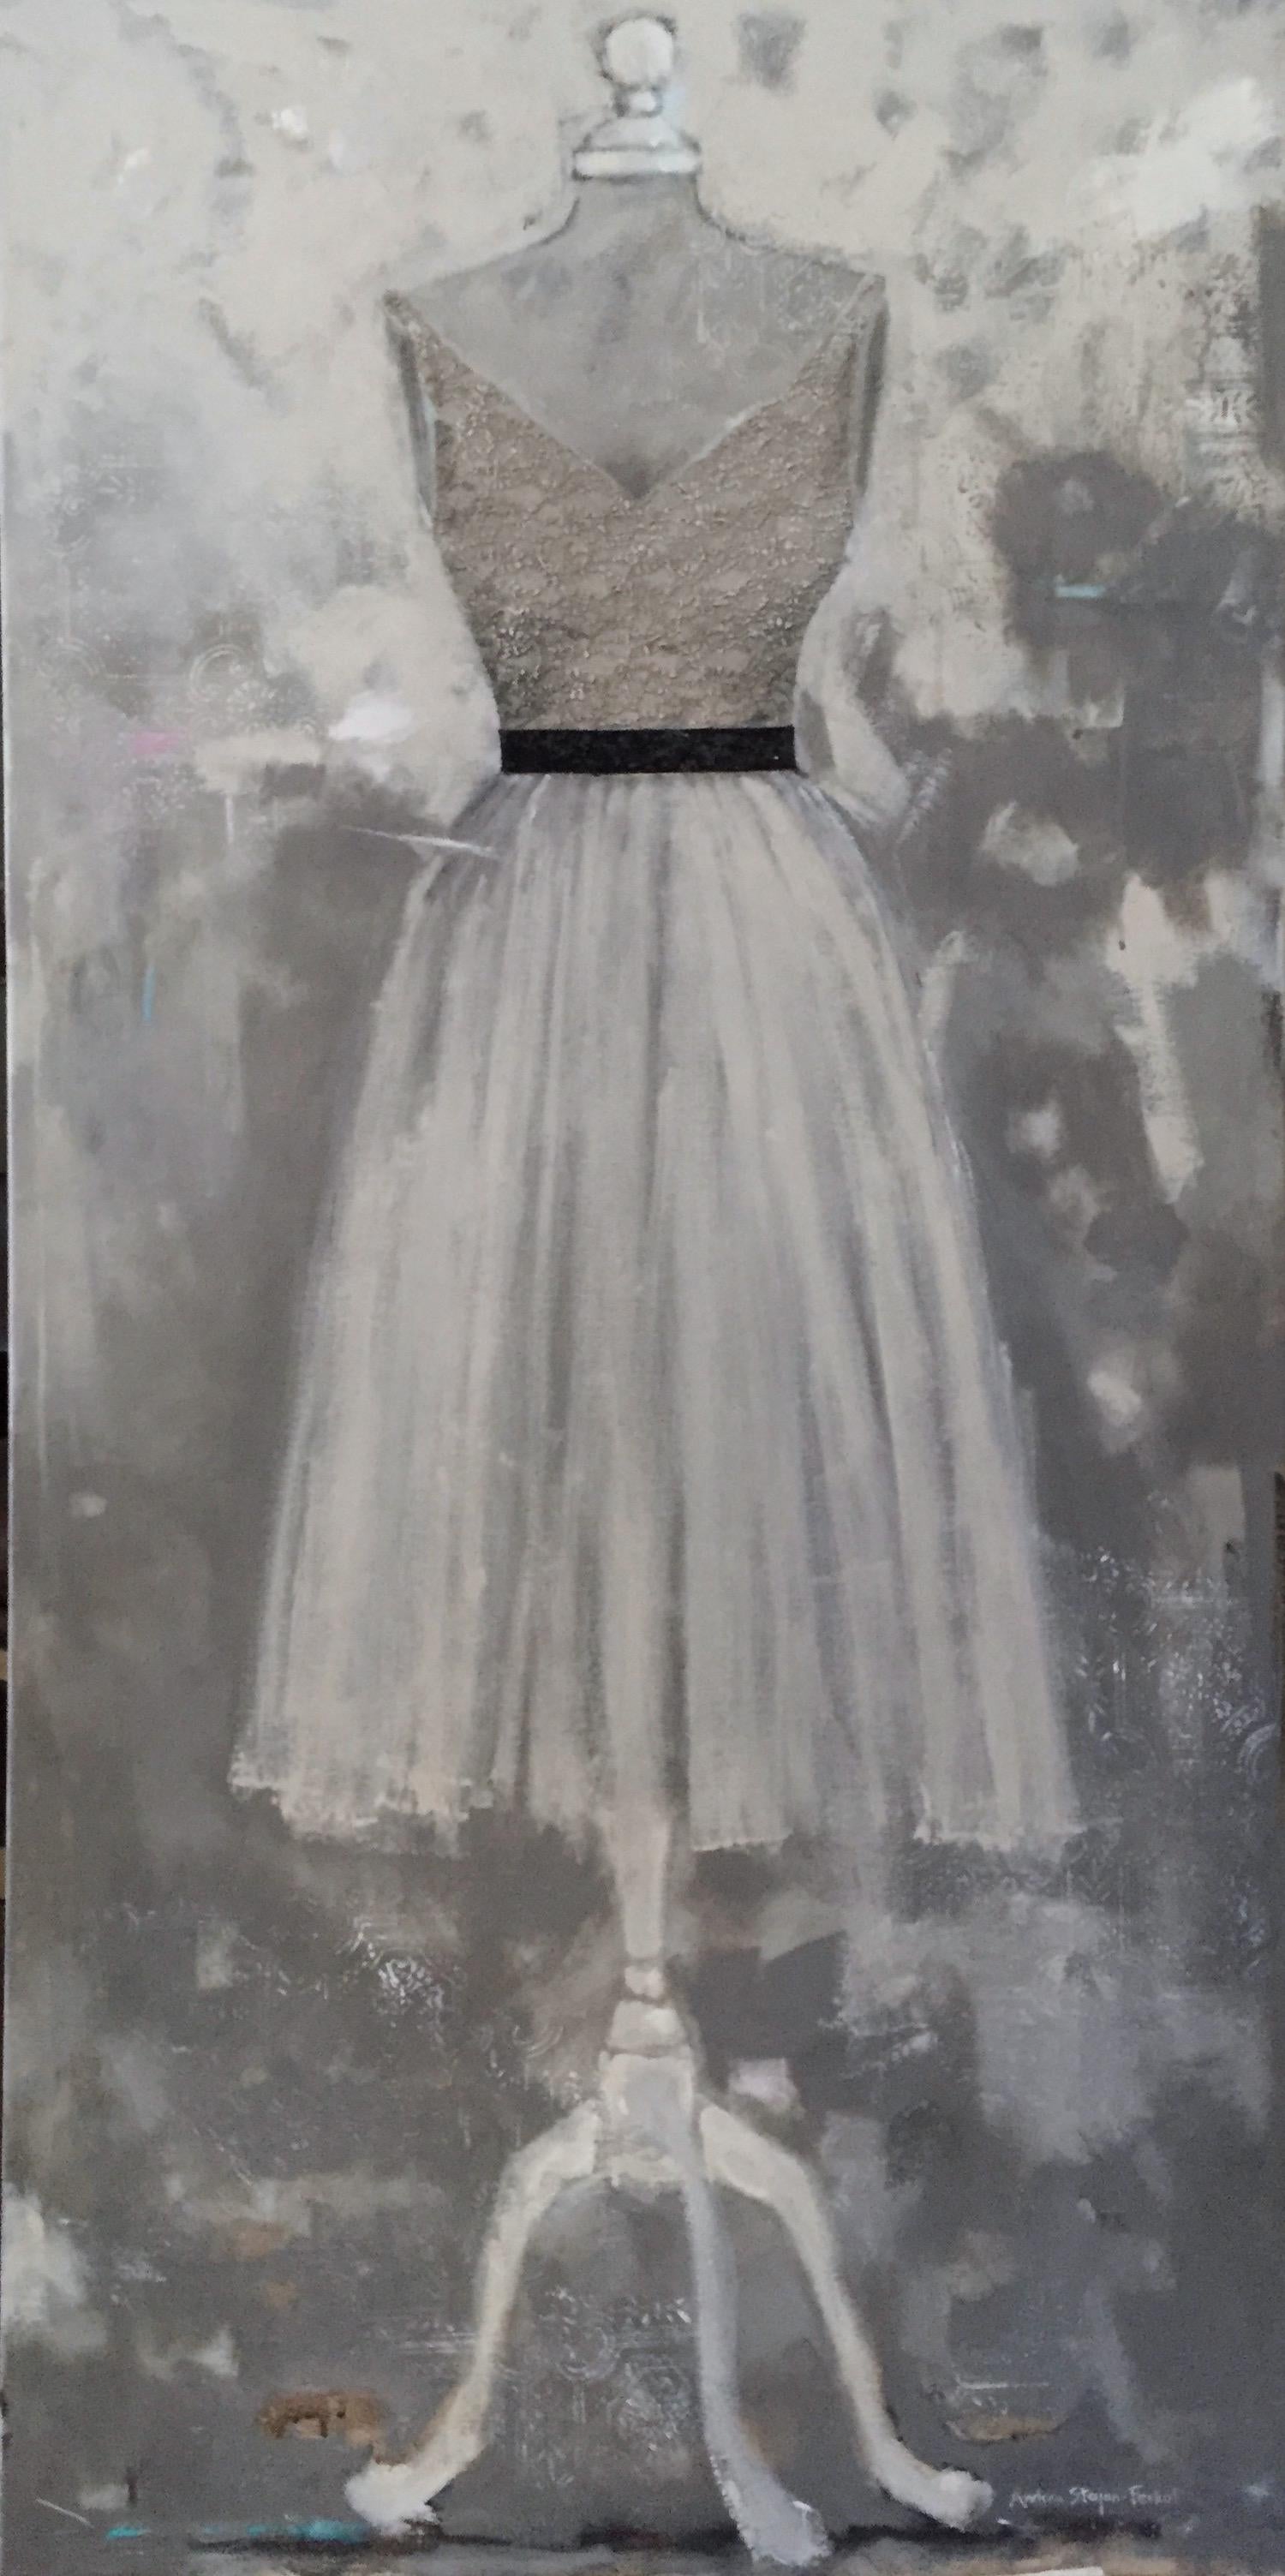 Just Another Tuesday - (30"x60", Neutral, Black, Still Life, Dress Painting) - Art by Andrea Stajan-Ferkul